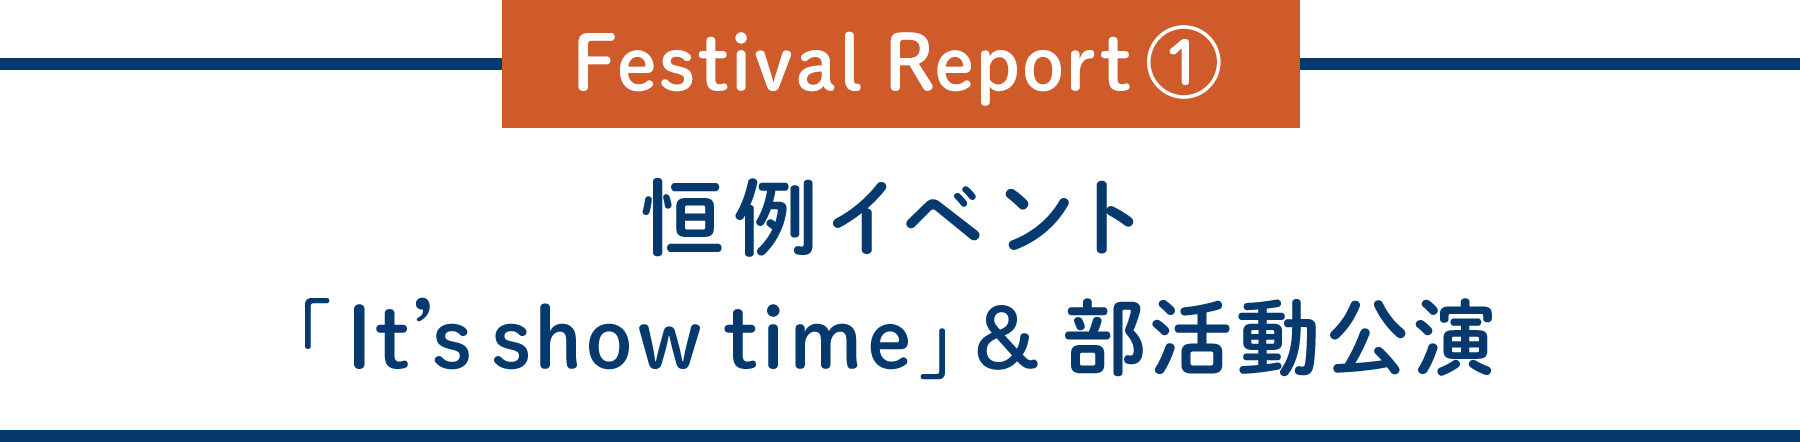 Festival Report①恒例イベント「It’s show time」＆部活動公演